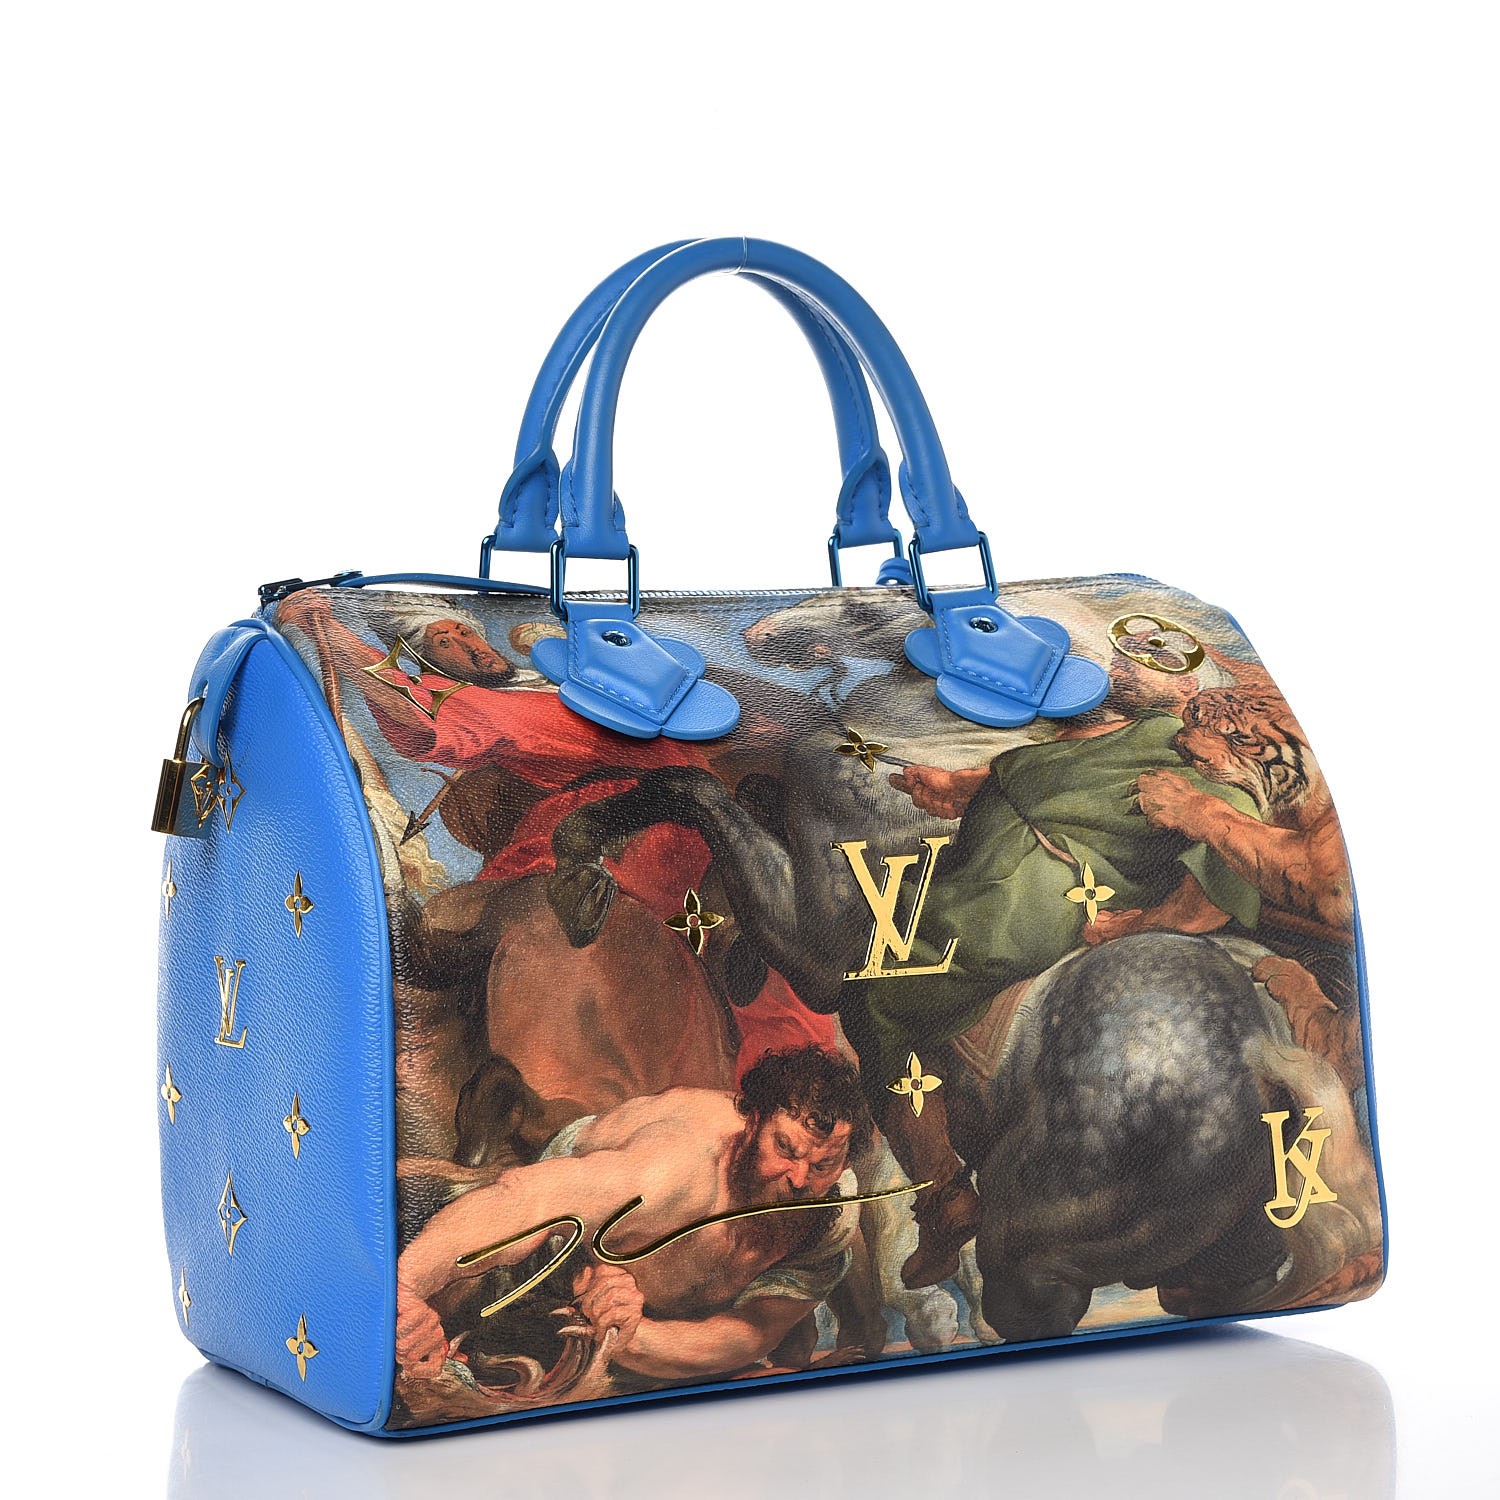 Sold at Auction: Louis Vuitton, LOUIS VUITTON JEFF KOONS MASTERS RUBENS  NEVERFULL